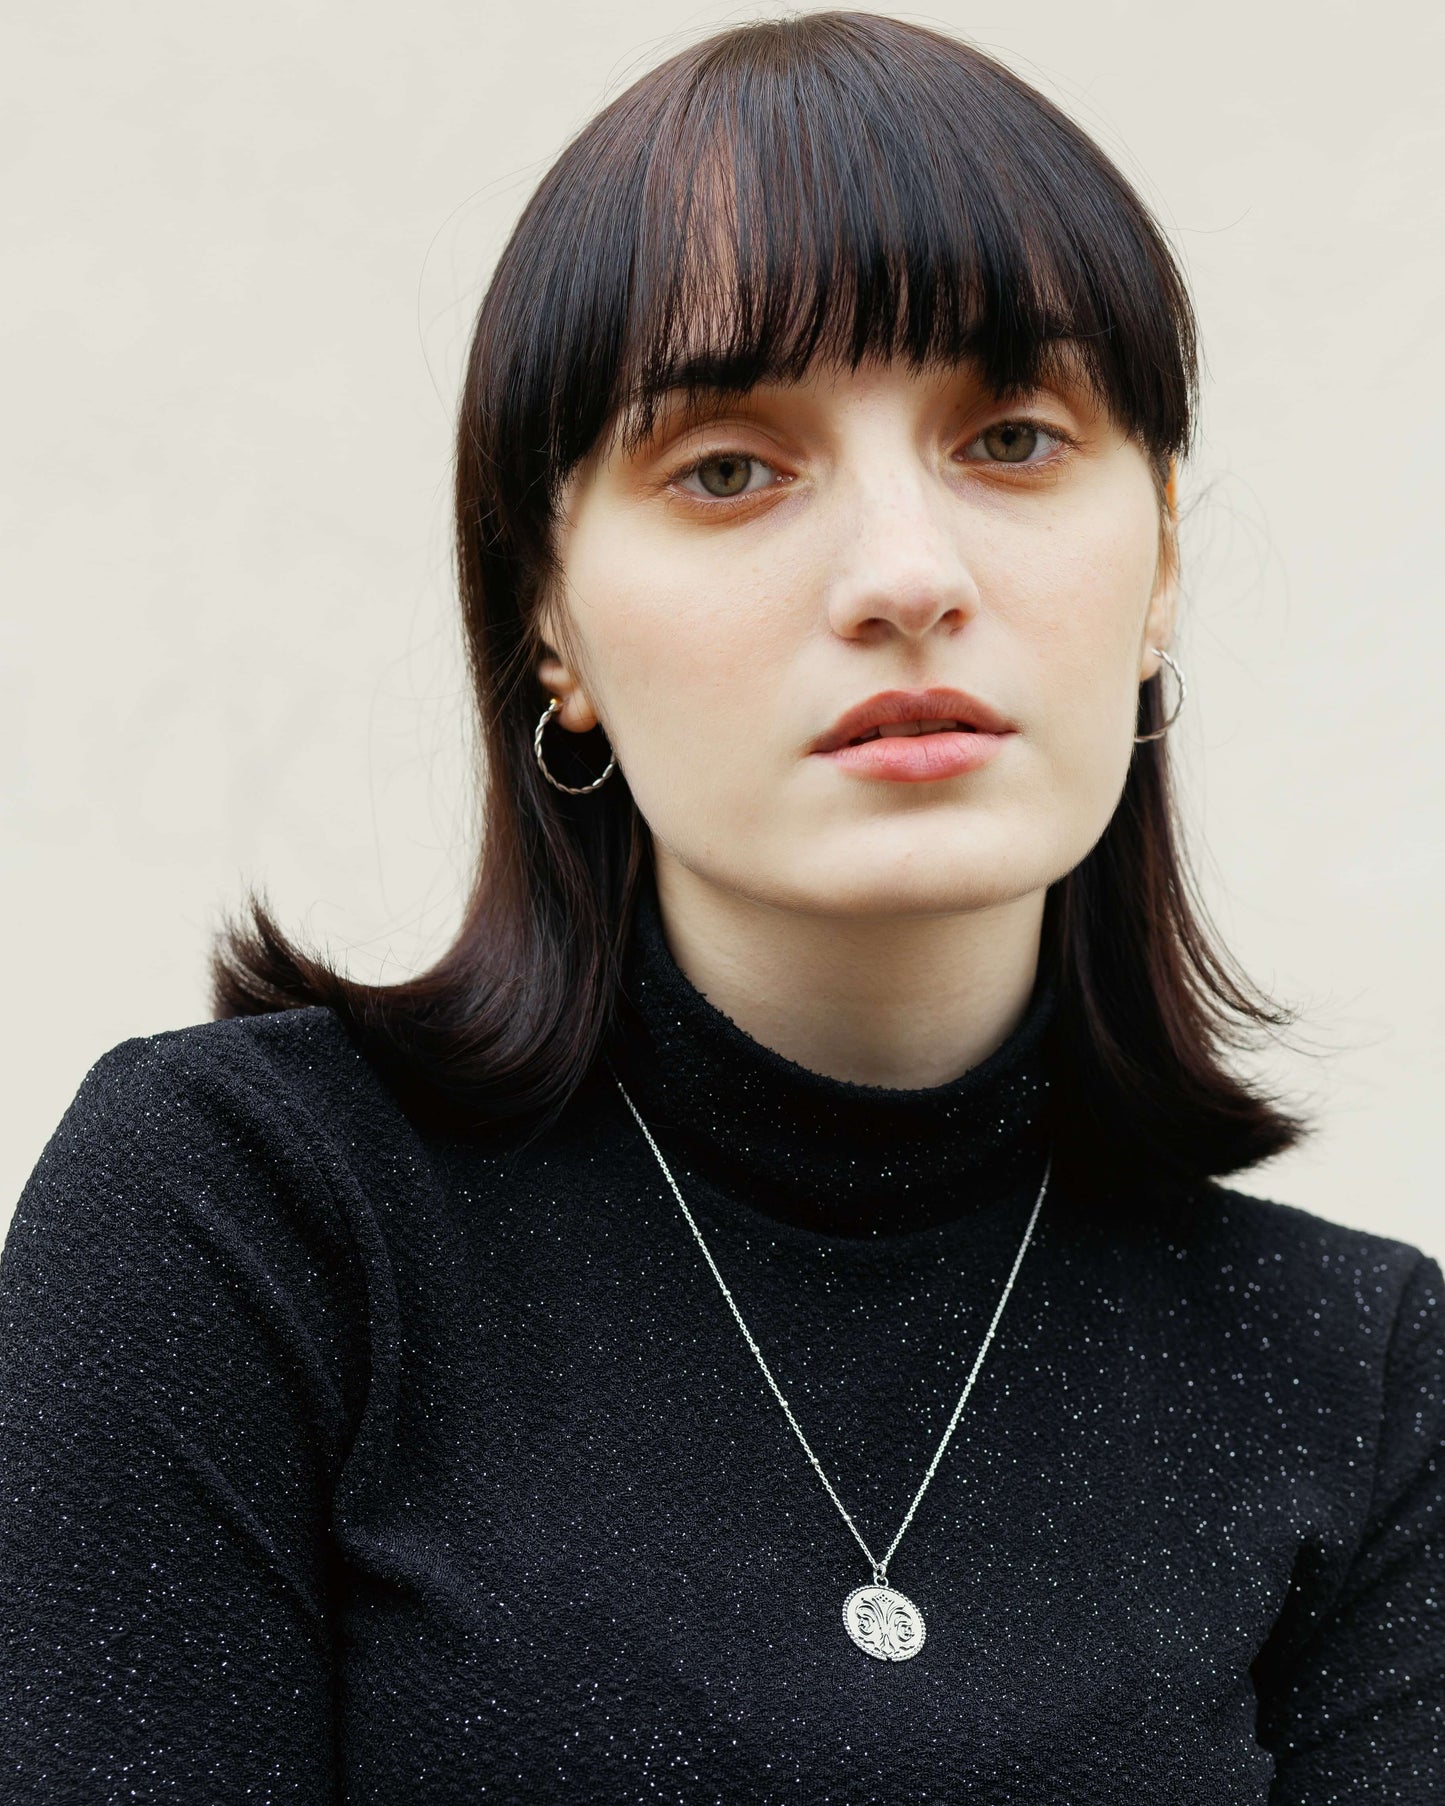 How To Style Necklaces And Turtlenecks Without Looking Weird | HuffPost Life